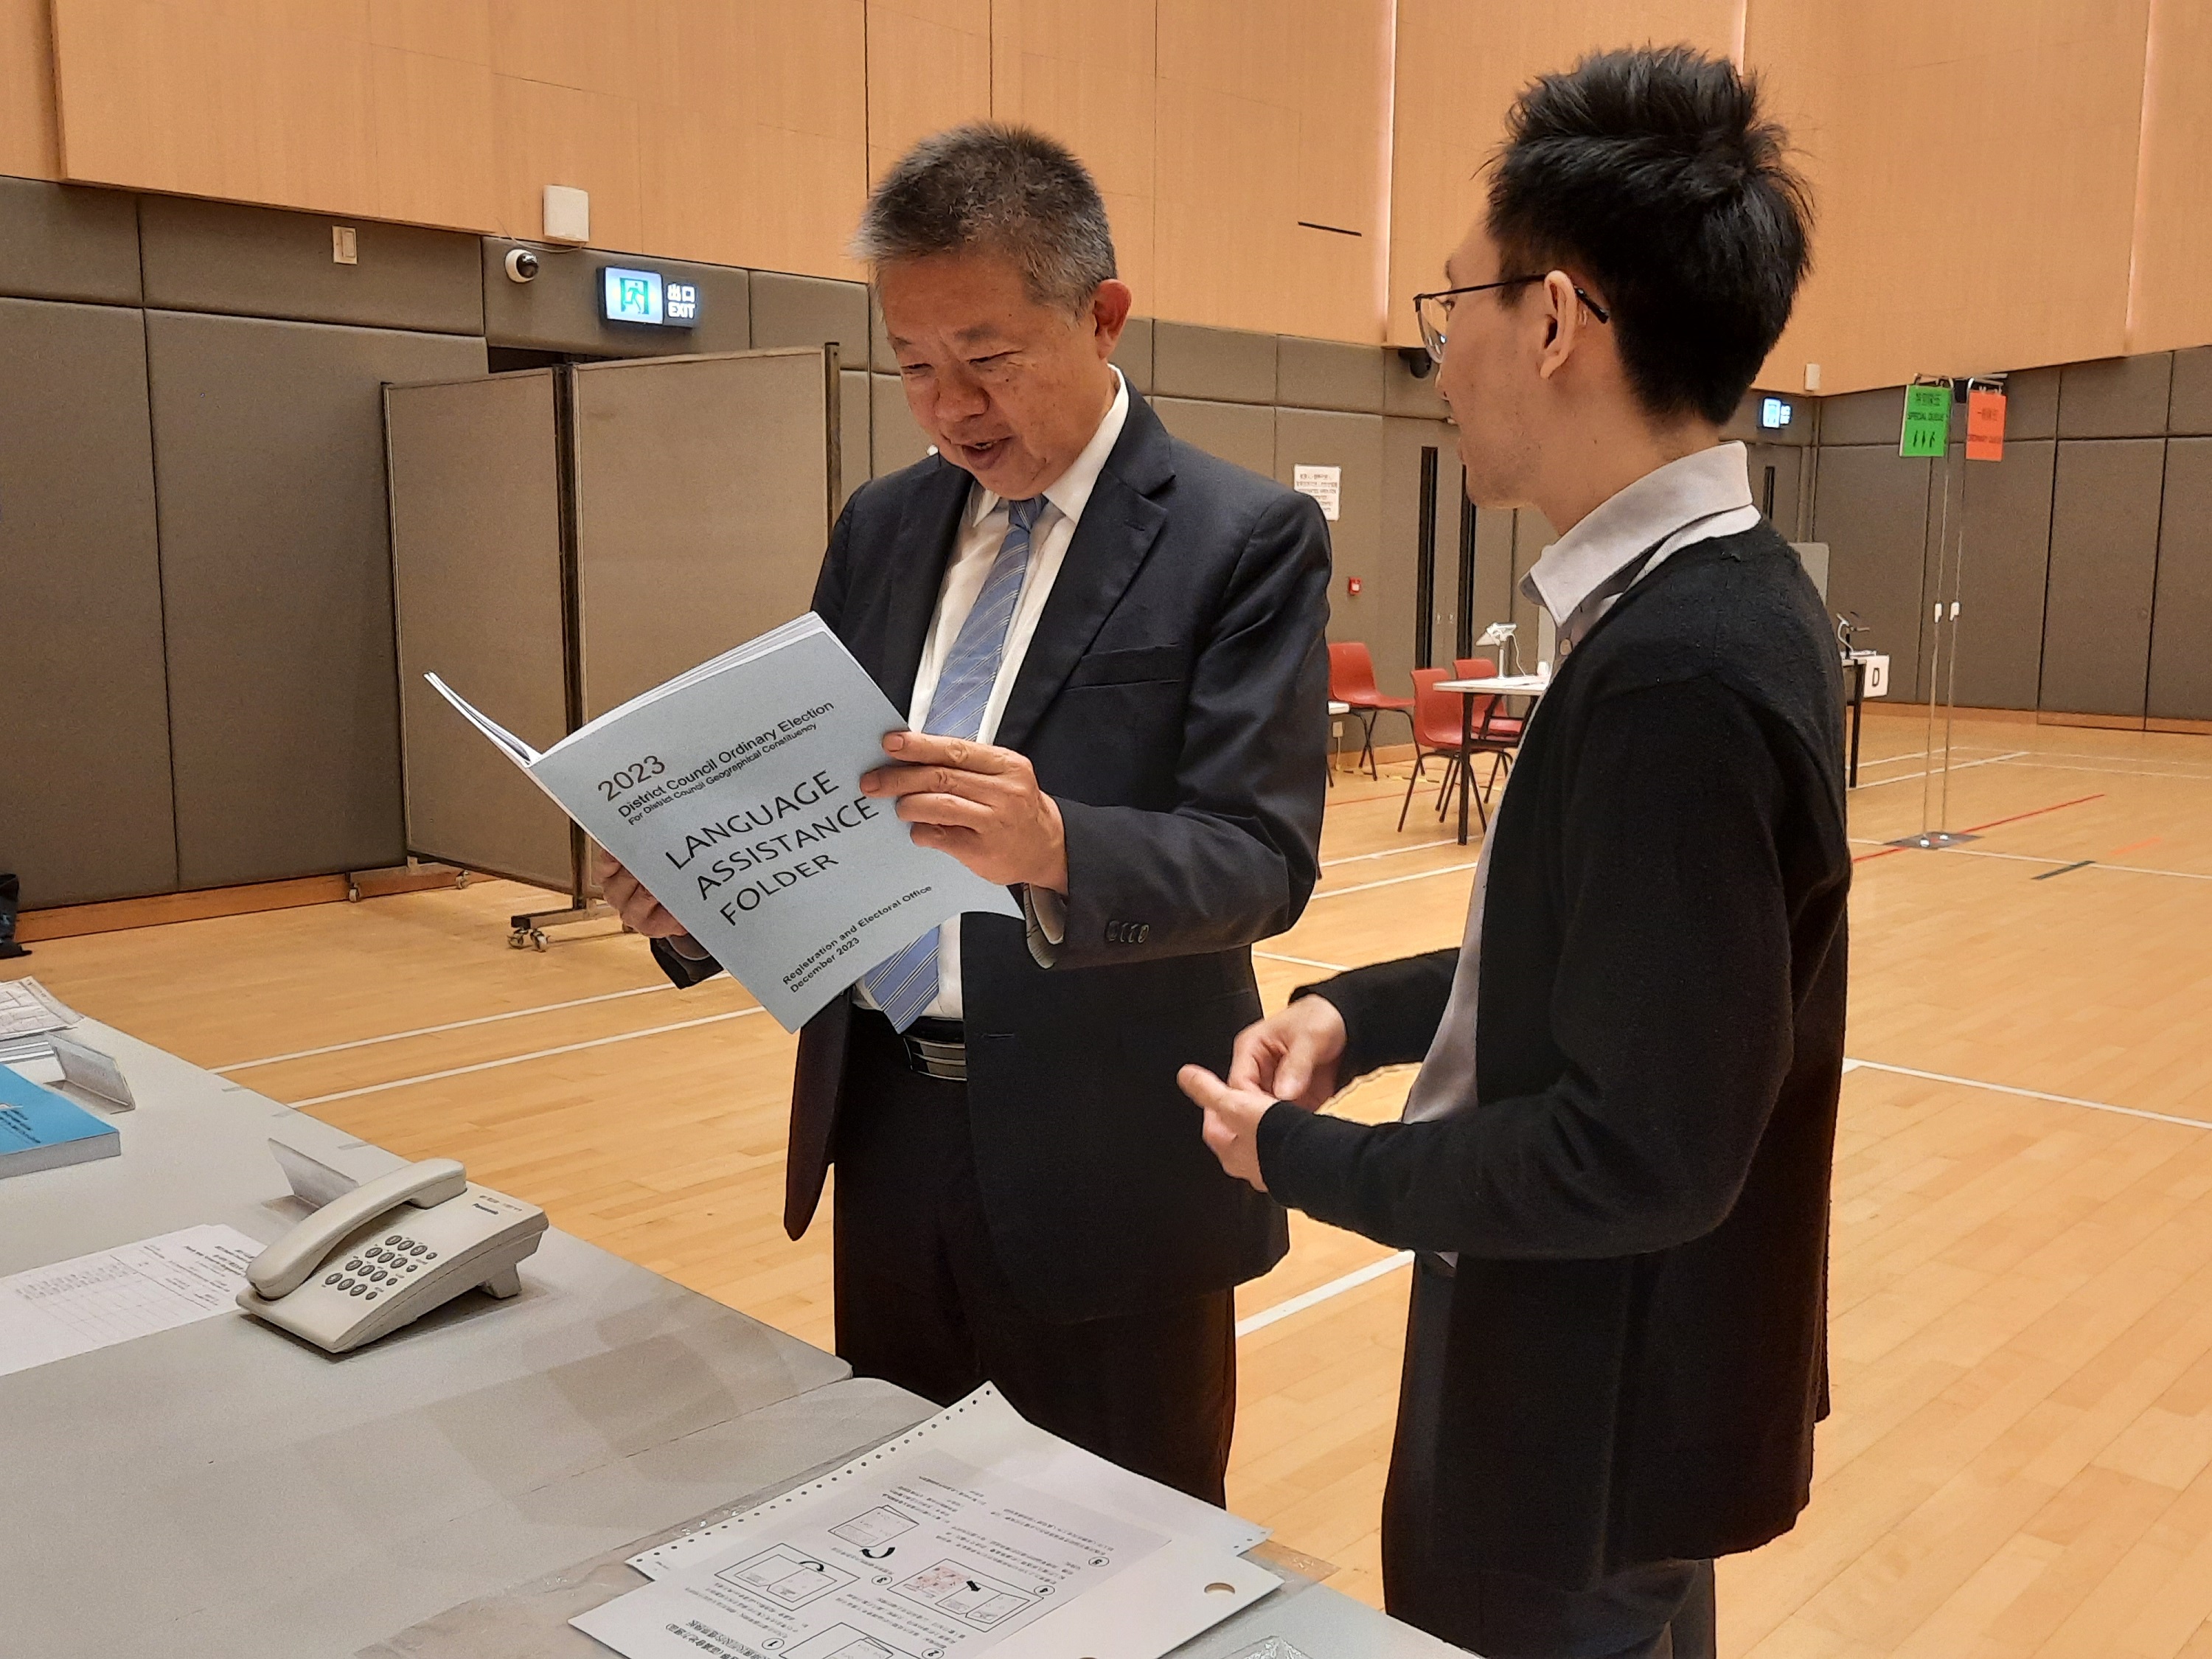 Polling stations will be equipped with a Language Assistance Folder which will contain guides on voting procedures written in eight languages in addition to Chinese, English, Japanese and Korean to assist electors of diverse races in casting their votes.